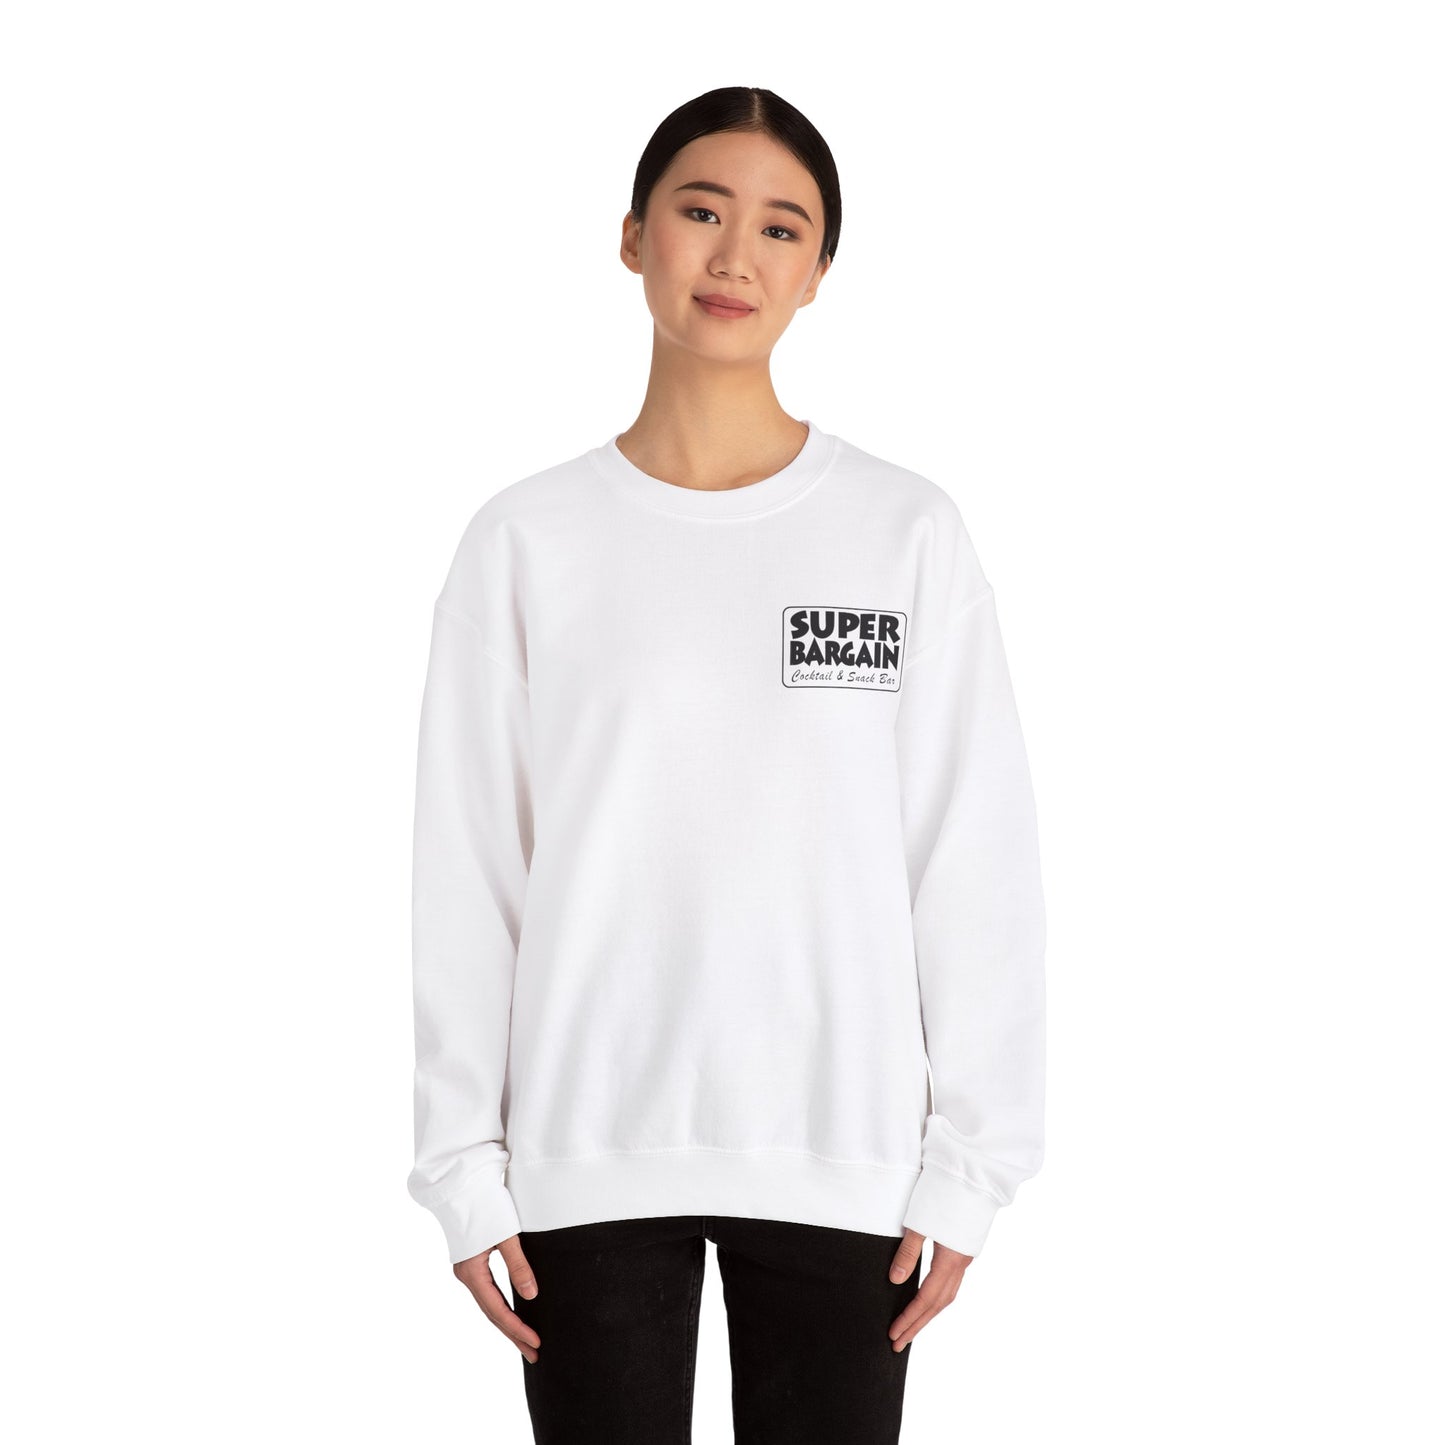 A young Asian woman wearing a white Printify Unisex Heavy Blend™ Crewneck Monochrome Logo and Cabbagetown Sweatshirt, standing against a plain background in Cabbagetown, Toronto.